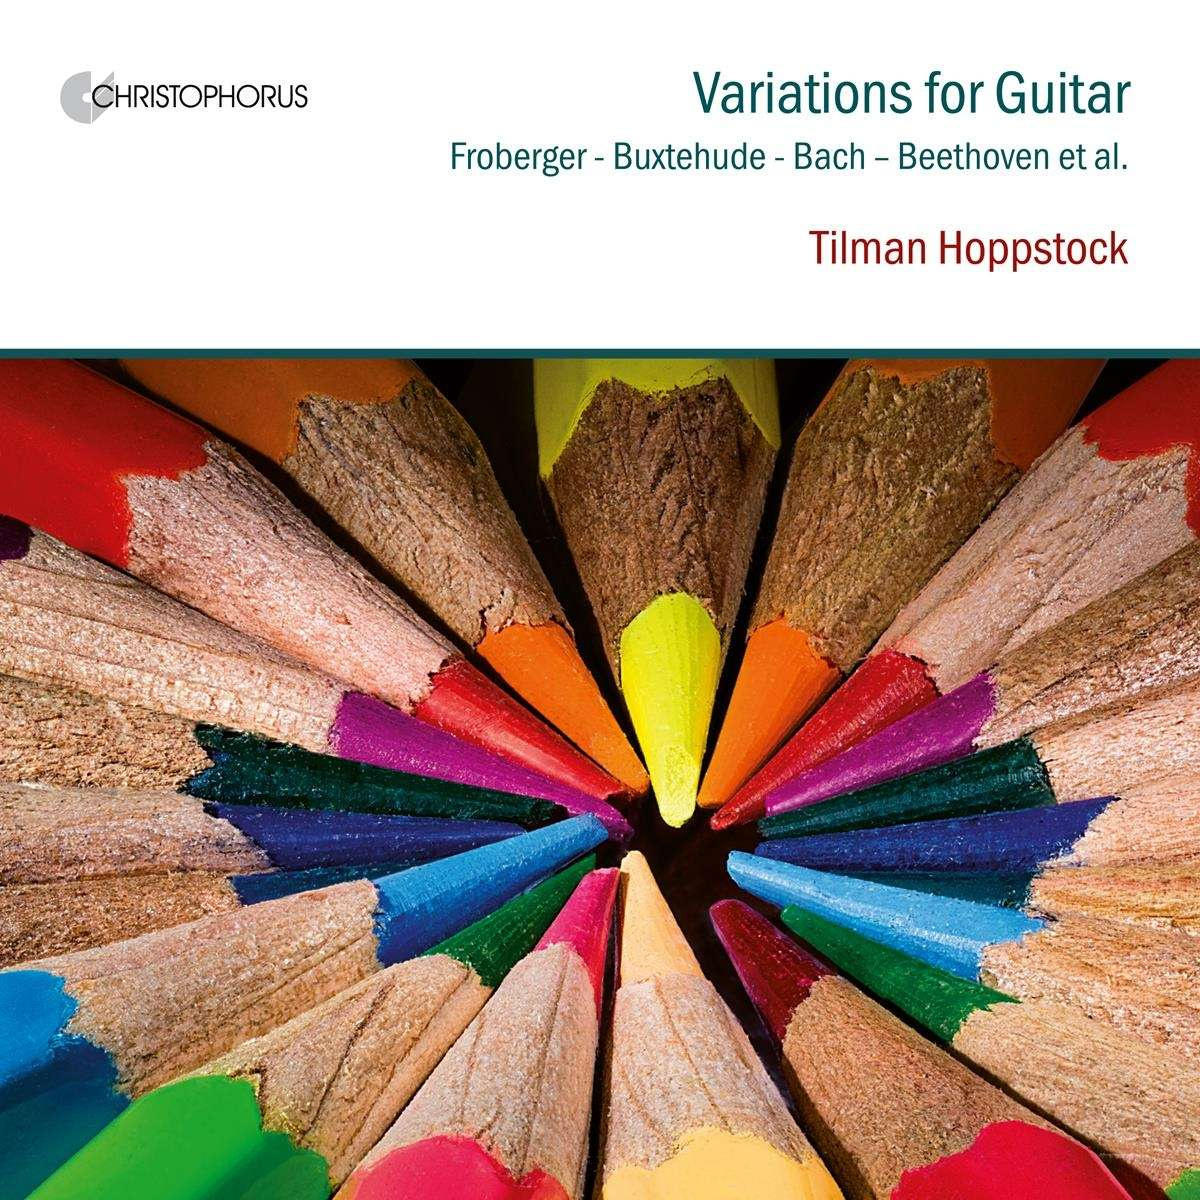 VARIATIONS FOR GUITAR - WORKS BY BACH, BUXTEHUDE, FROBERGER ET. AL.